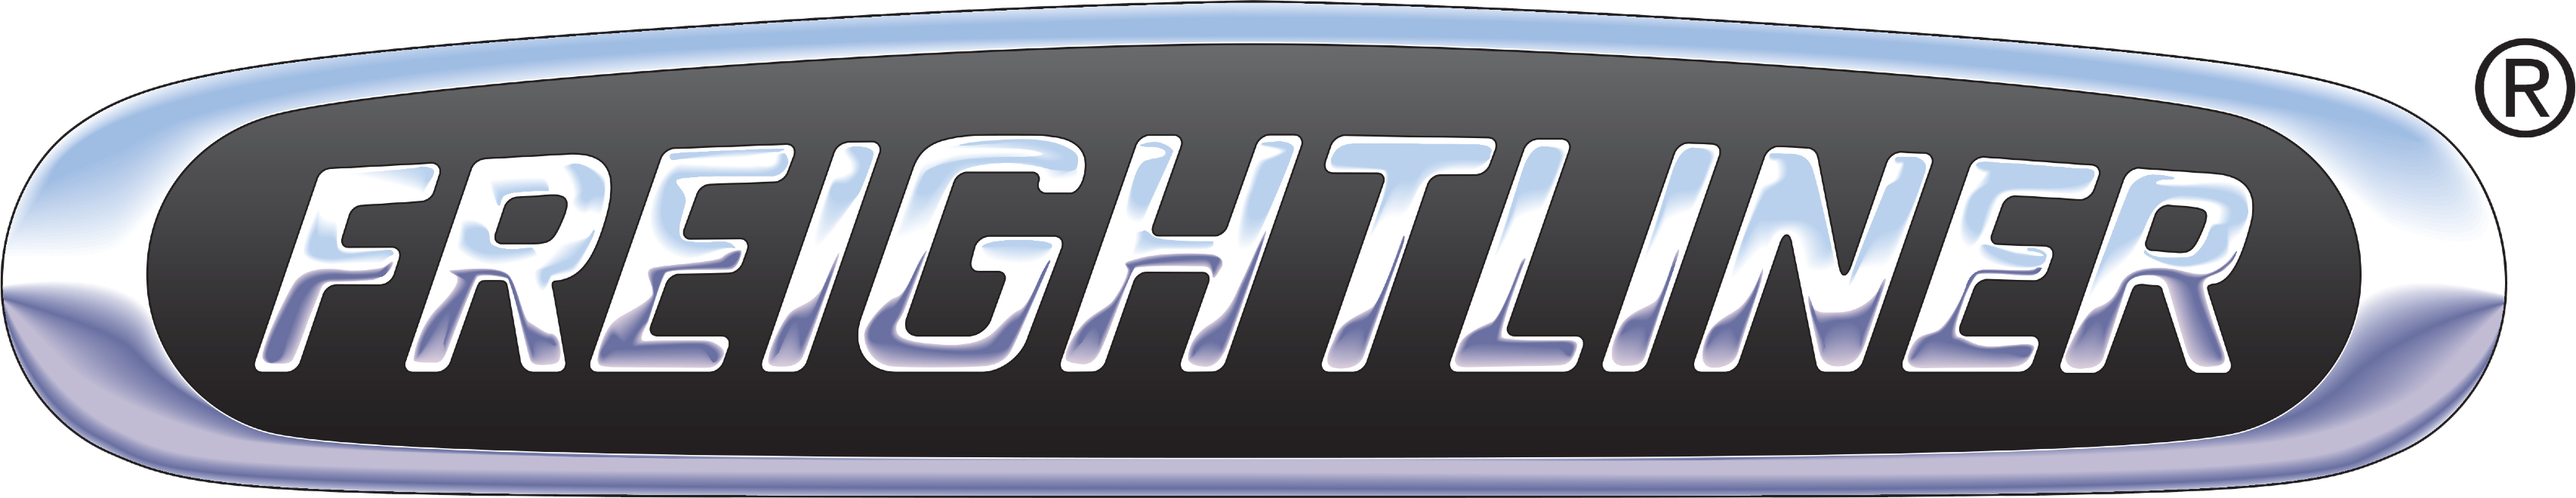 Image - Freightliner-logo.png | Logopedia | FANDOM powered by Wikia